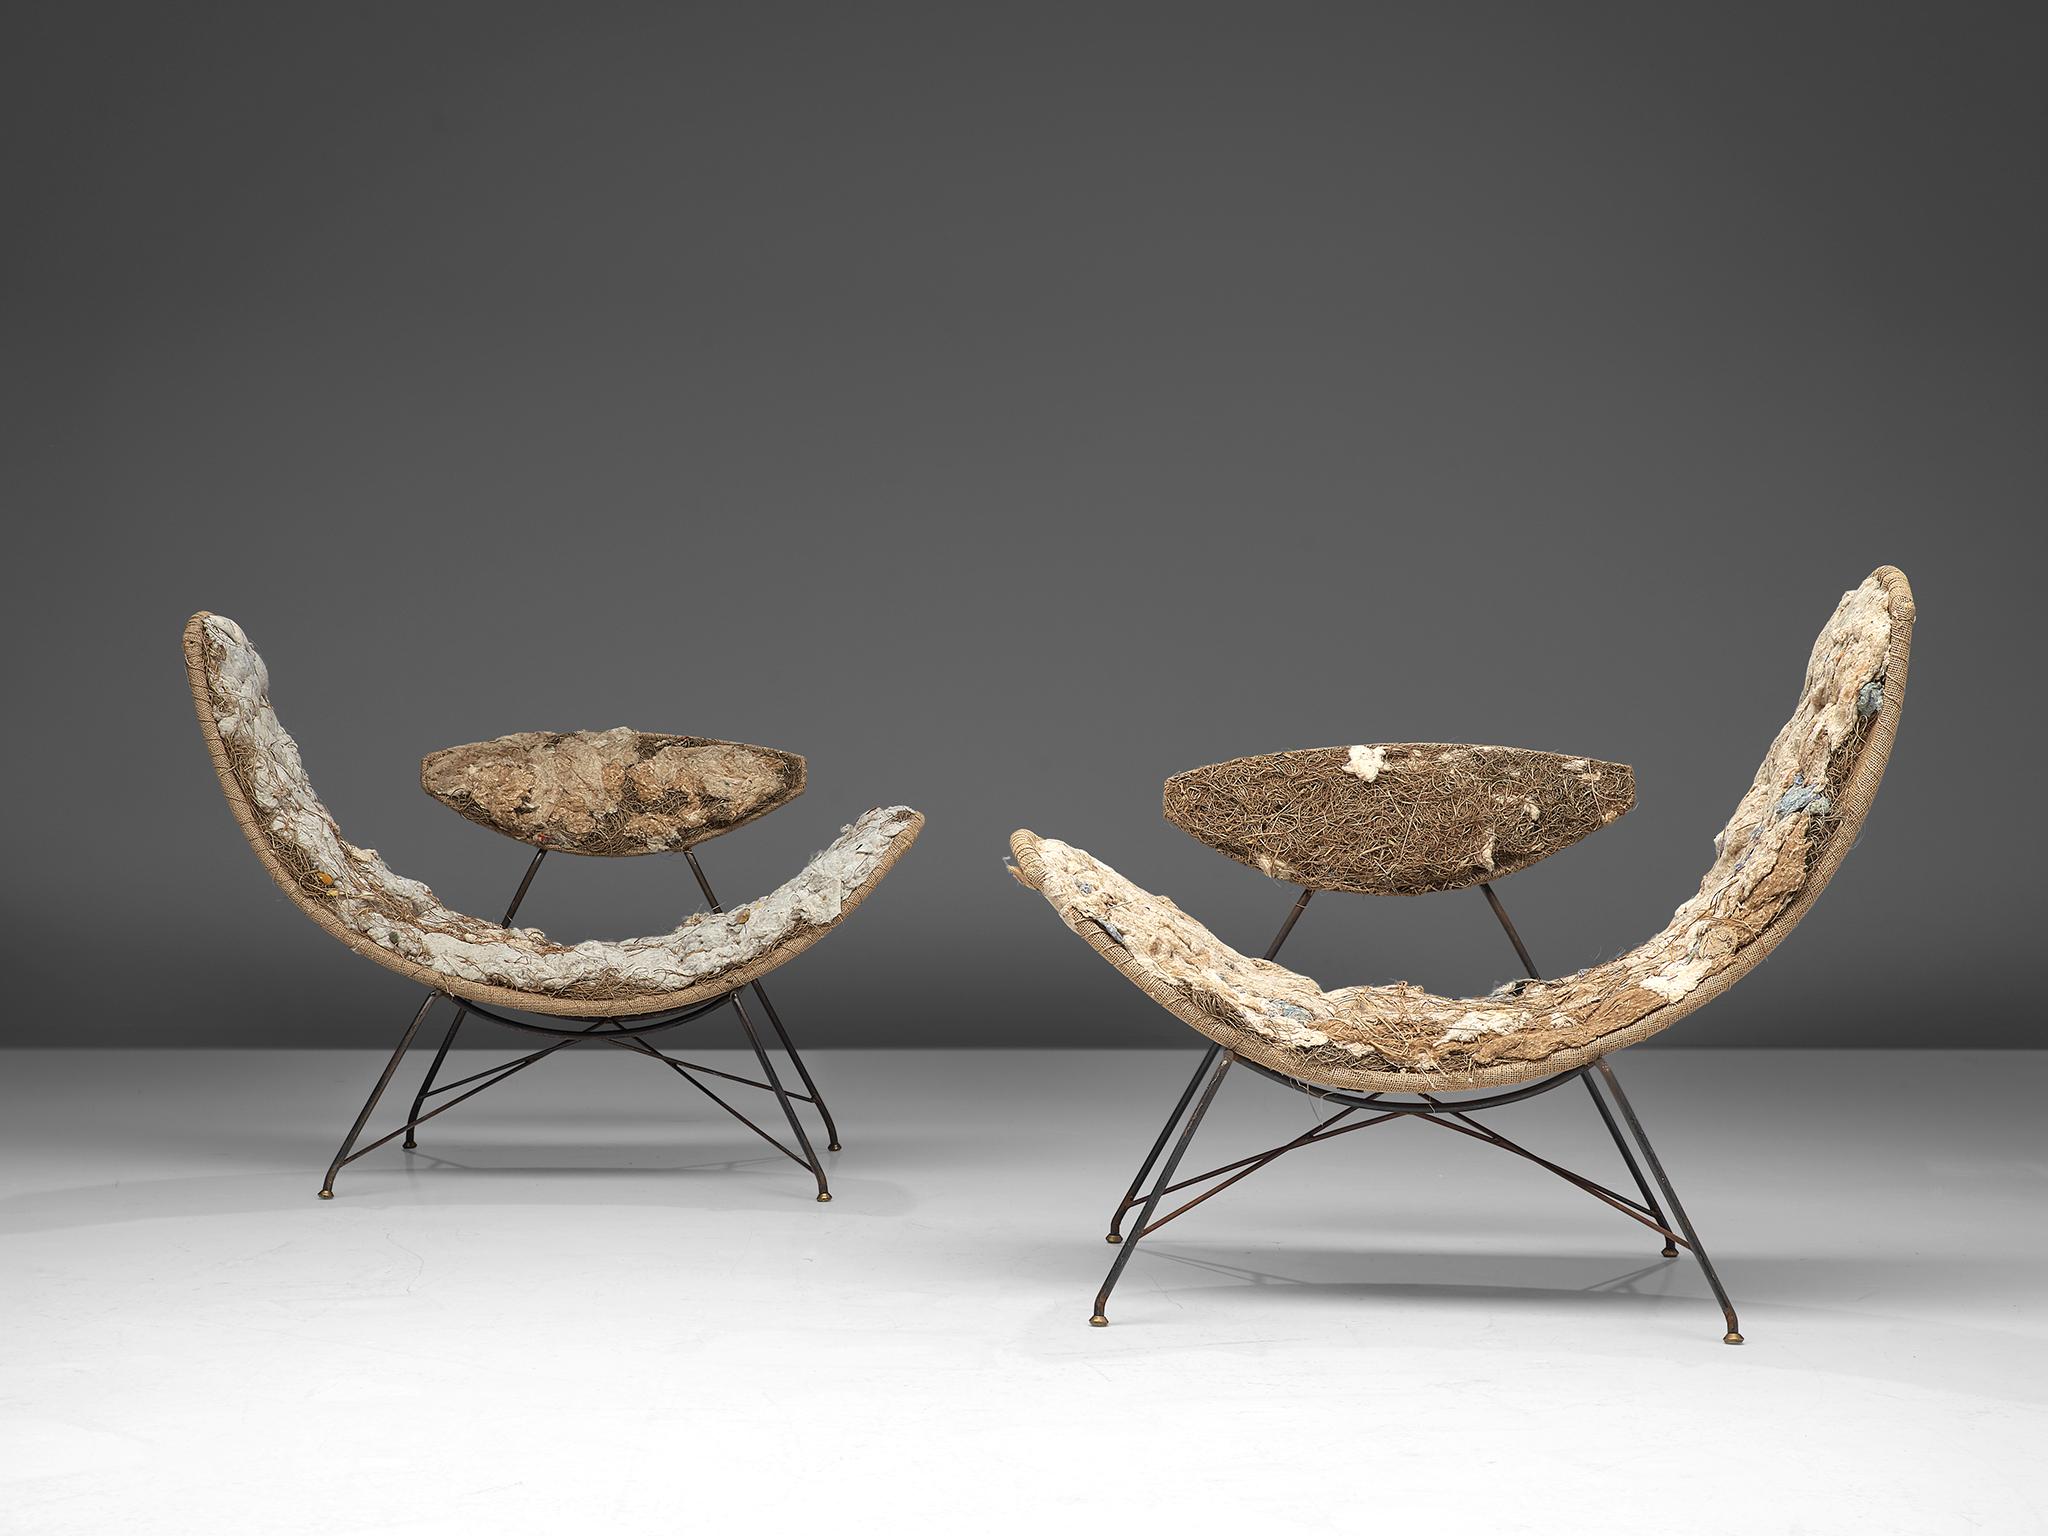 Martin Eisler, pair of early edition reversible chairs, iron, brass, Brazil, 1955.

Two early edition Eisler reversible chairs. These chairs feature only the use of original materials, consisting of a metal frame, brass feet and the interior made